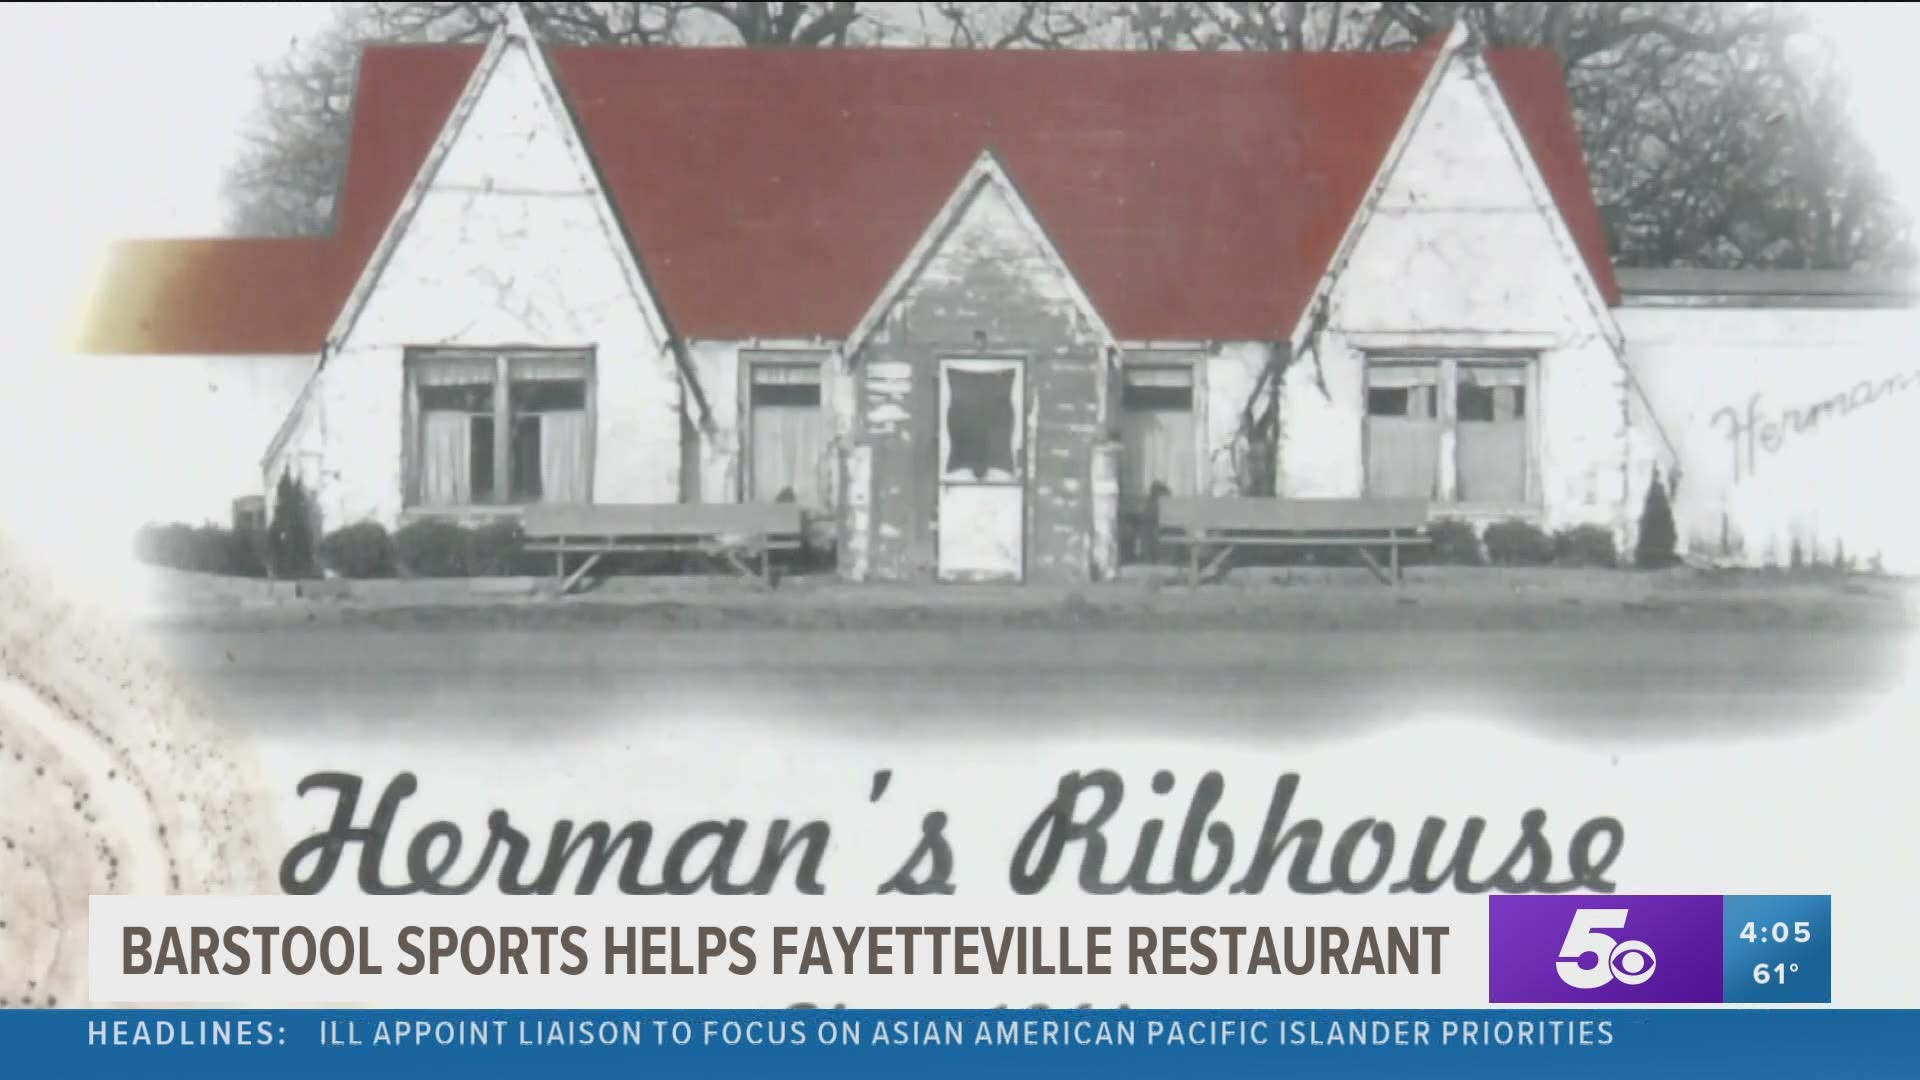 When the pandemic hit, the owners of Herman's Rib House feared they might have to close but thanks to Barstool Sports it doesn’t.